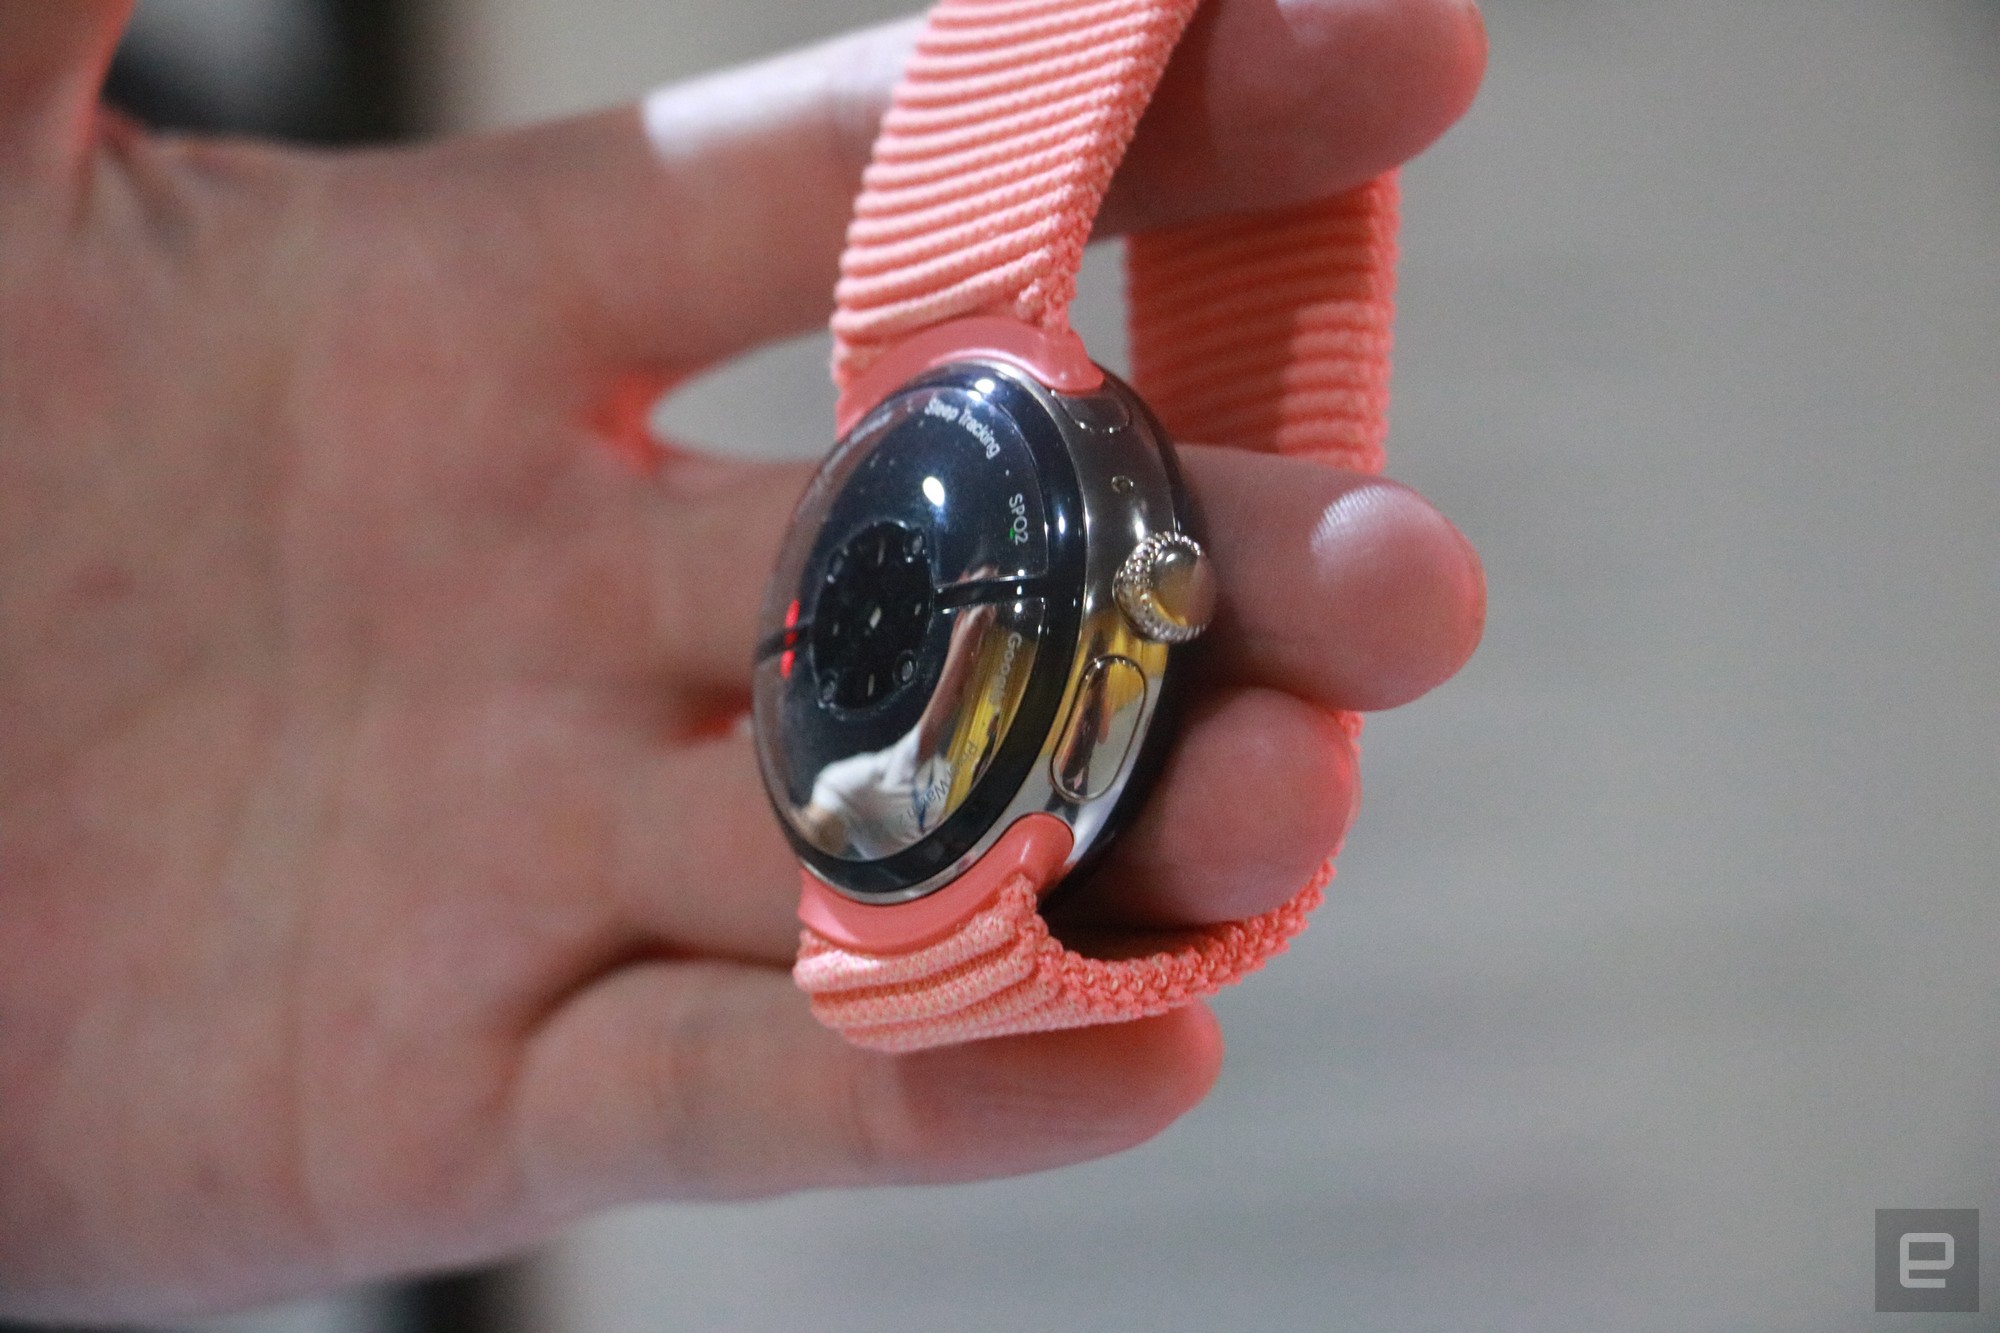 A side view of the underside of the Pixel Watch 2, showing its charging setup and new sensors, as well as the crown and button on the bezel.